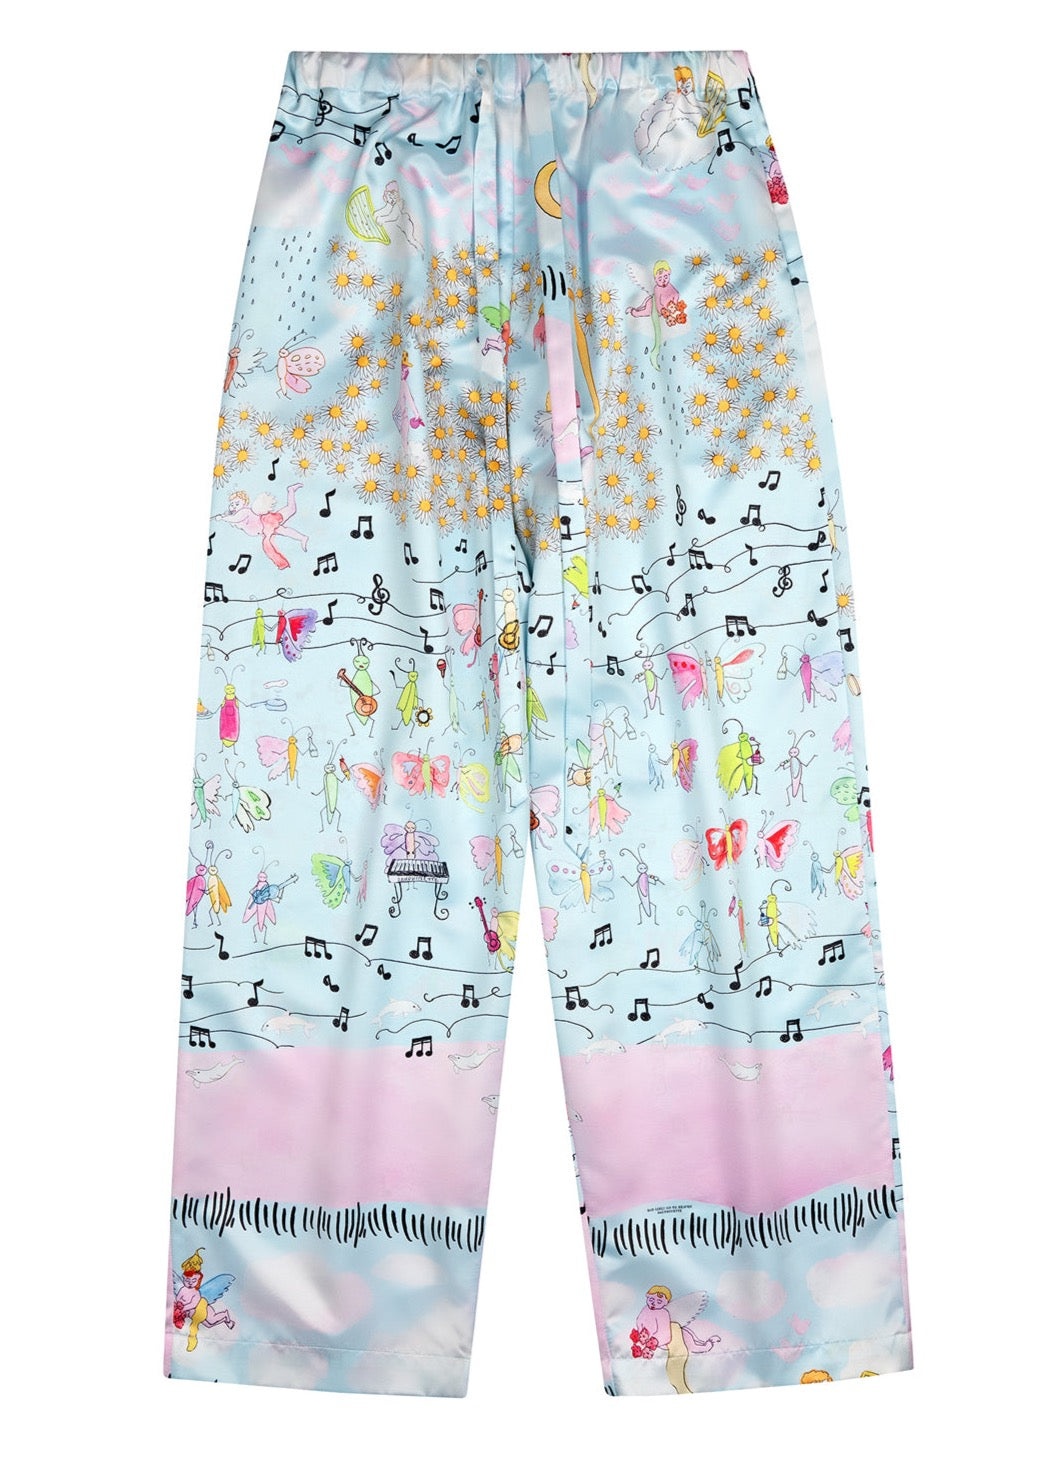 Relax into angelically soft viscose, printed in our SS22 Bad Girls Go to Heaven print. Dotted with cheerful daisies and music notes, our dancing bugs and flying cherubs